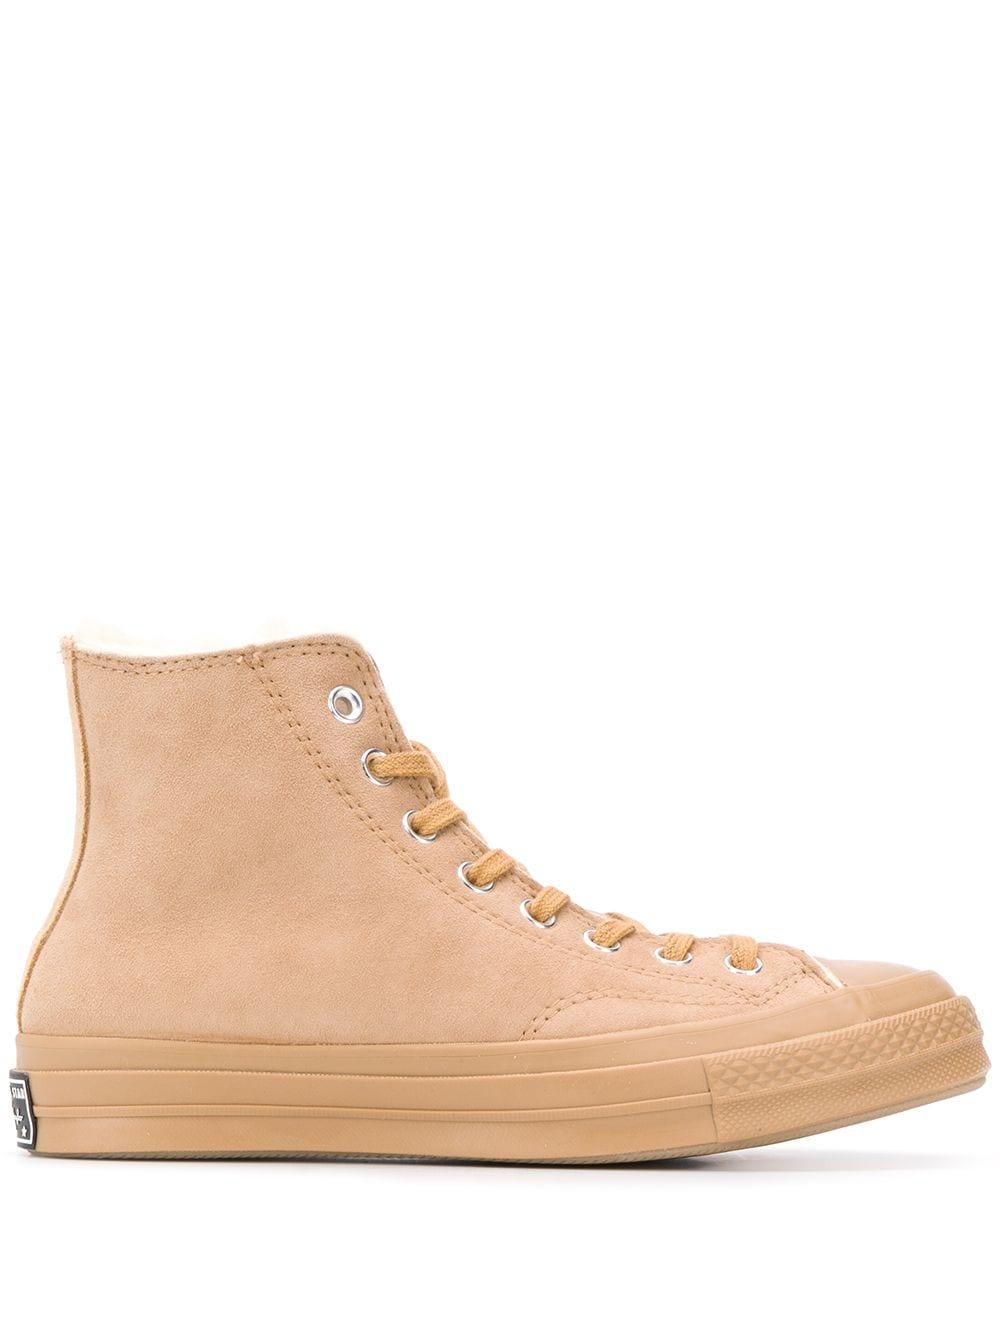 Converse Leather High Top Shearling Lined Sneakers in Natural - Lyst